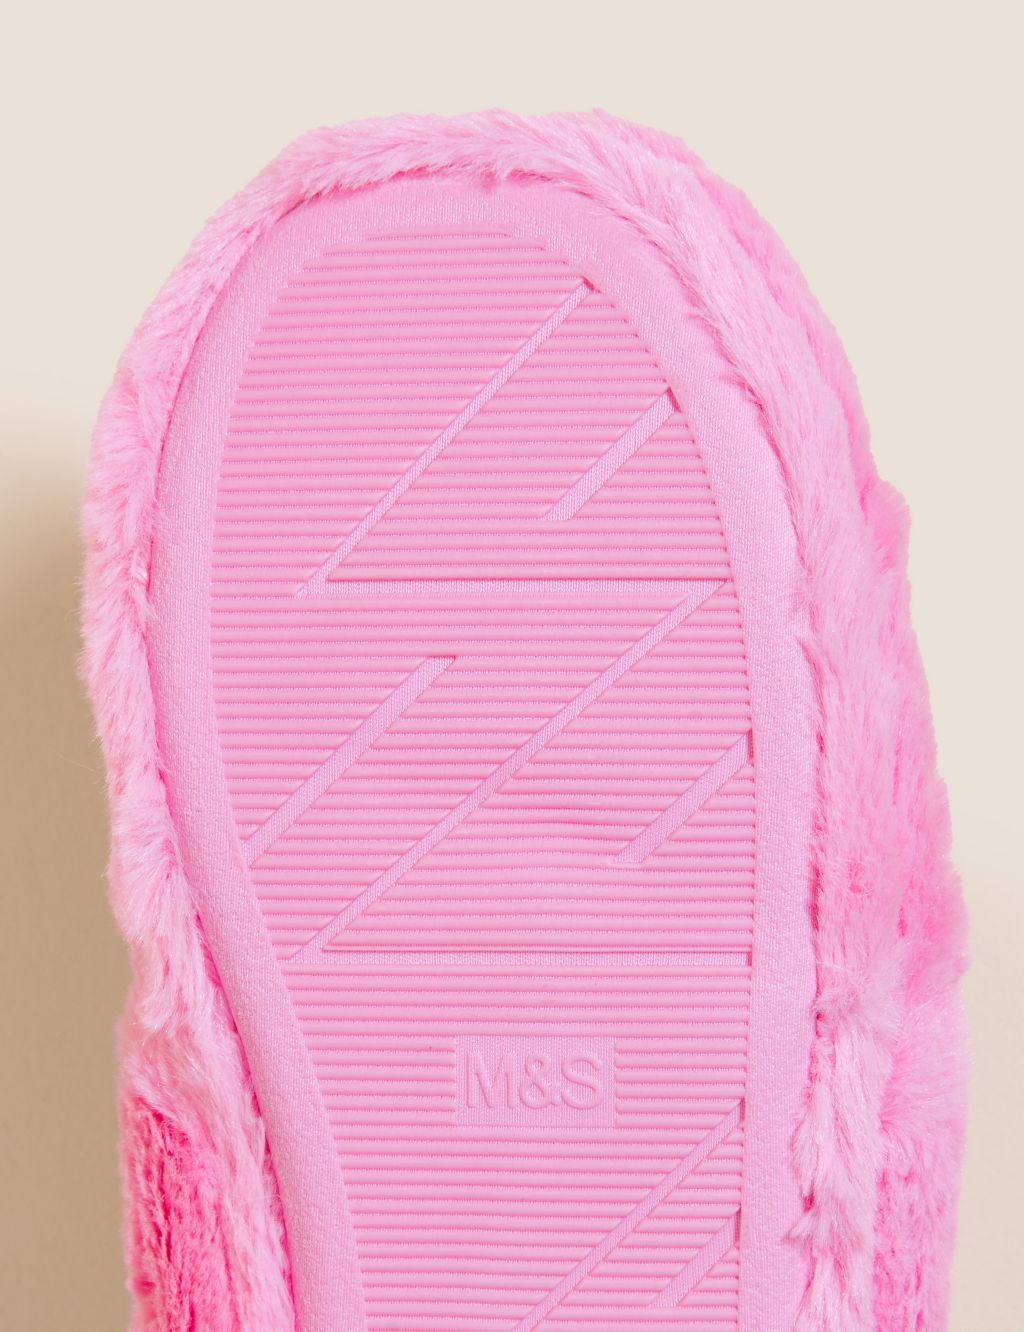 Kids' Percy Pig™ Slippers (5 Small - 6 Large) image 3